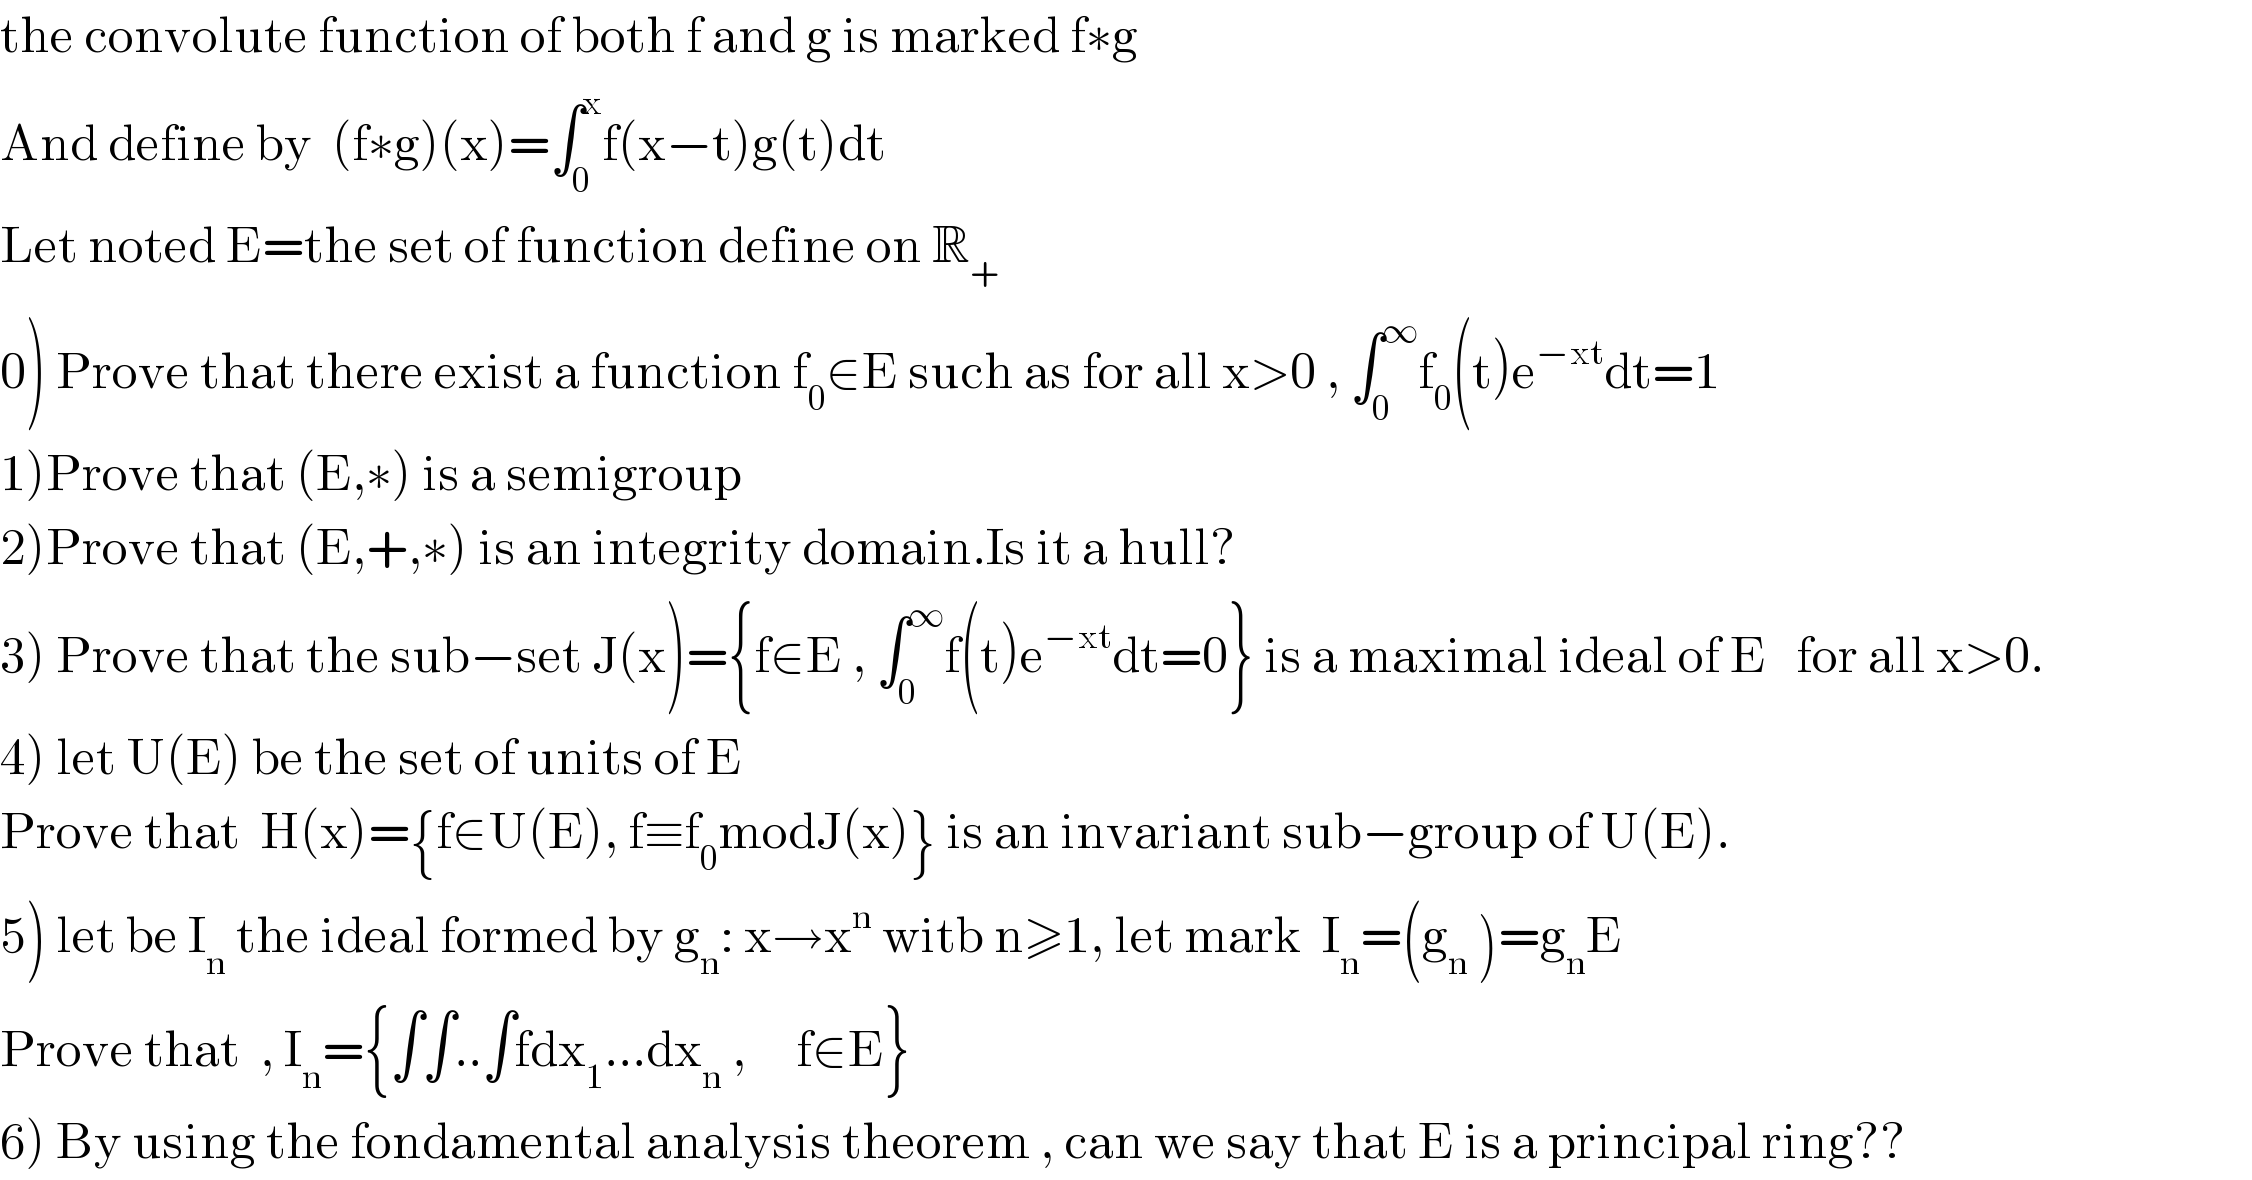 the convolute function of both f and g is marked f∗g  And define by  (f∗g)(x)=∫_0 ^x f(x−t)g(t)dt  Let noted E=the set of function define on R_+   0) Prove that there exist a function f_0 ∈E such as for all x>0 , ∫_0 ^∞ f_0 (t)e^(−xt) dt=1  1)Prove that (E,∗) is a semigroup  2)Prove that (E,+,∗) is an integrity domain.Is it a hull?   3) Prove that the sub−set J(x)={f∈E , ∫_0 ^∞ f(t)e^(−xt) dt=0} is a maximal ideal of E   for all x>0.  4) let U(E) be the set of units of E  Prove that  H(x)={f∈U(E), f≡f_0 modJ(x)} is an invariant sub−group of U(E).  5) let be I_n  the ideal formed by g_n : x→x^n  witb n≥1, let mark  I_n =(g_n  )=g_n E  Prove that  , I_n ={∫∫..∫fdx_1 ...dx_n  ,     f∈E}  6) By using the fondamental analysis theorem , can we say that E is a principal ring??  